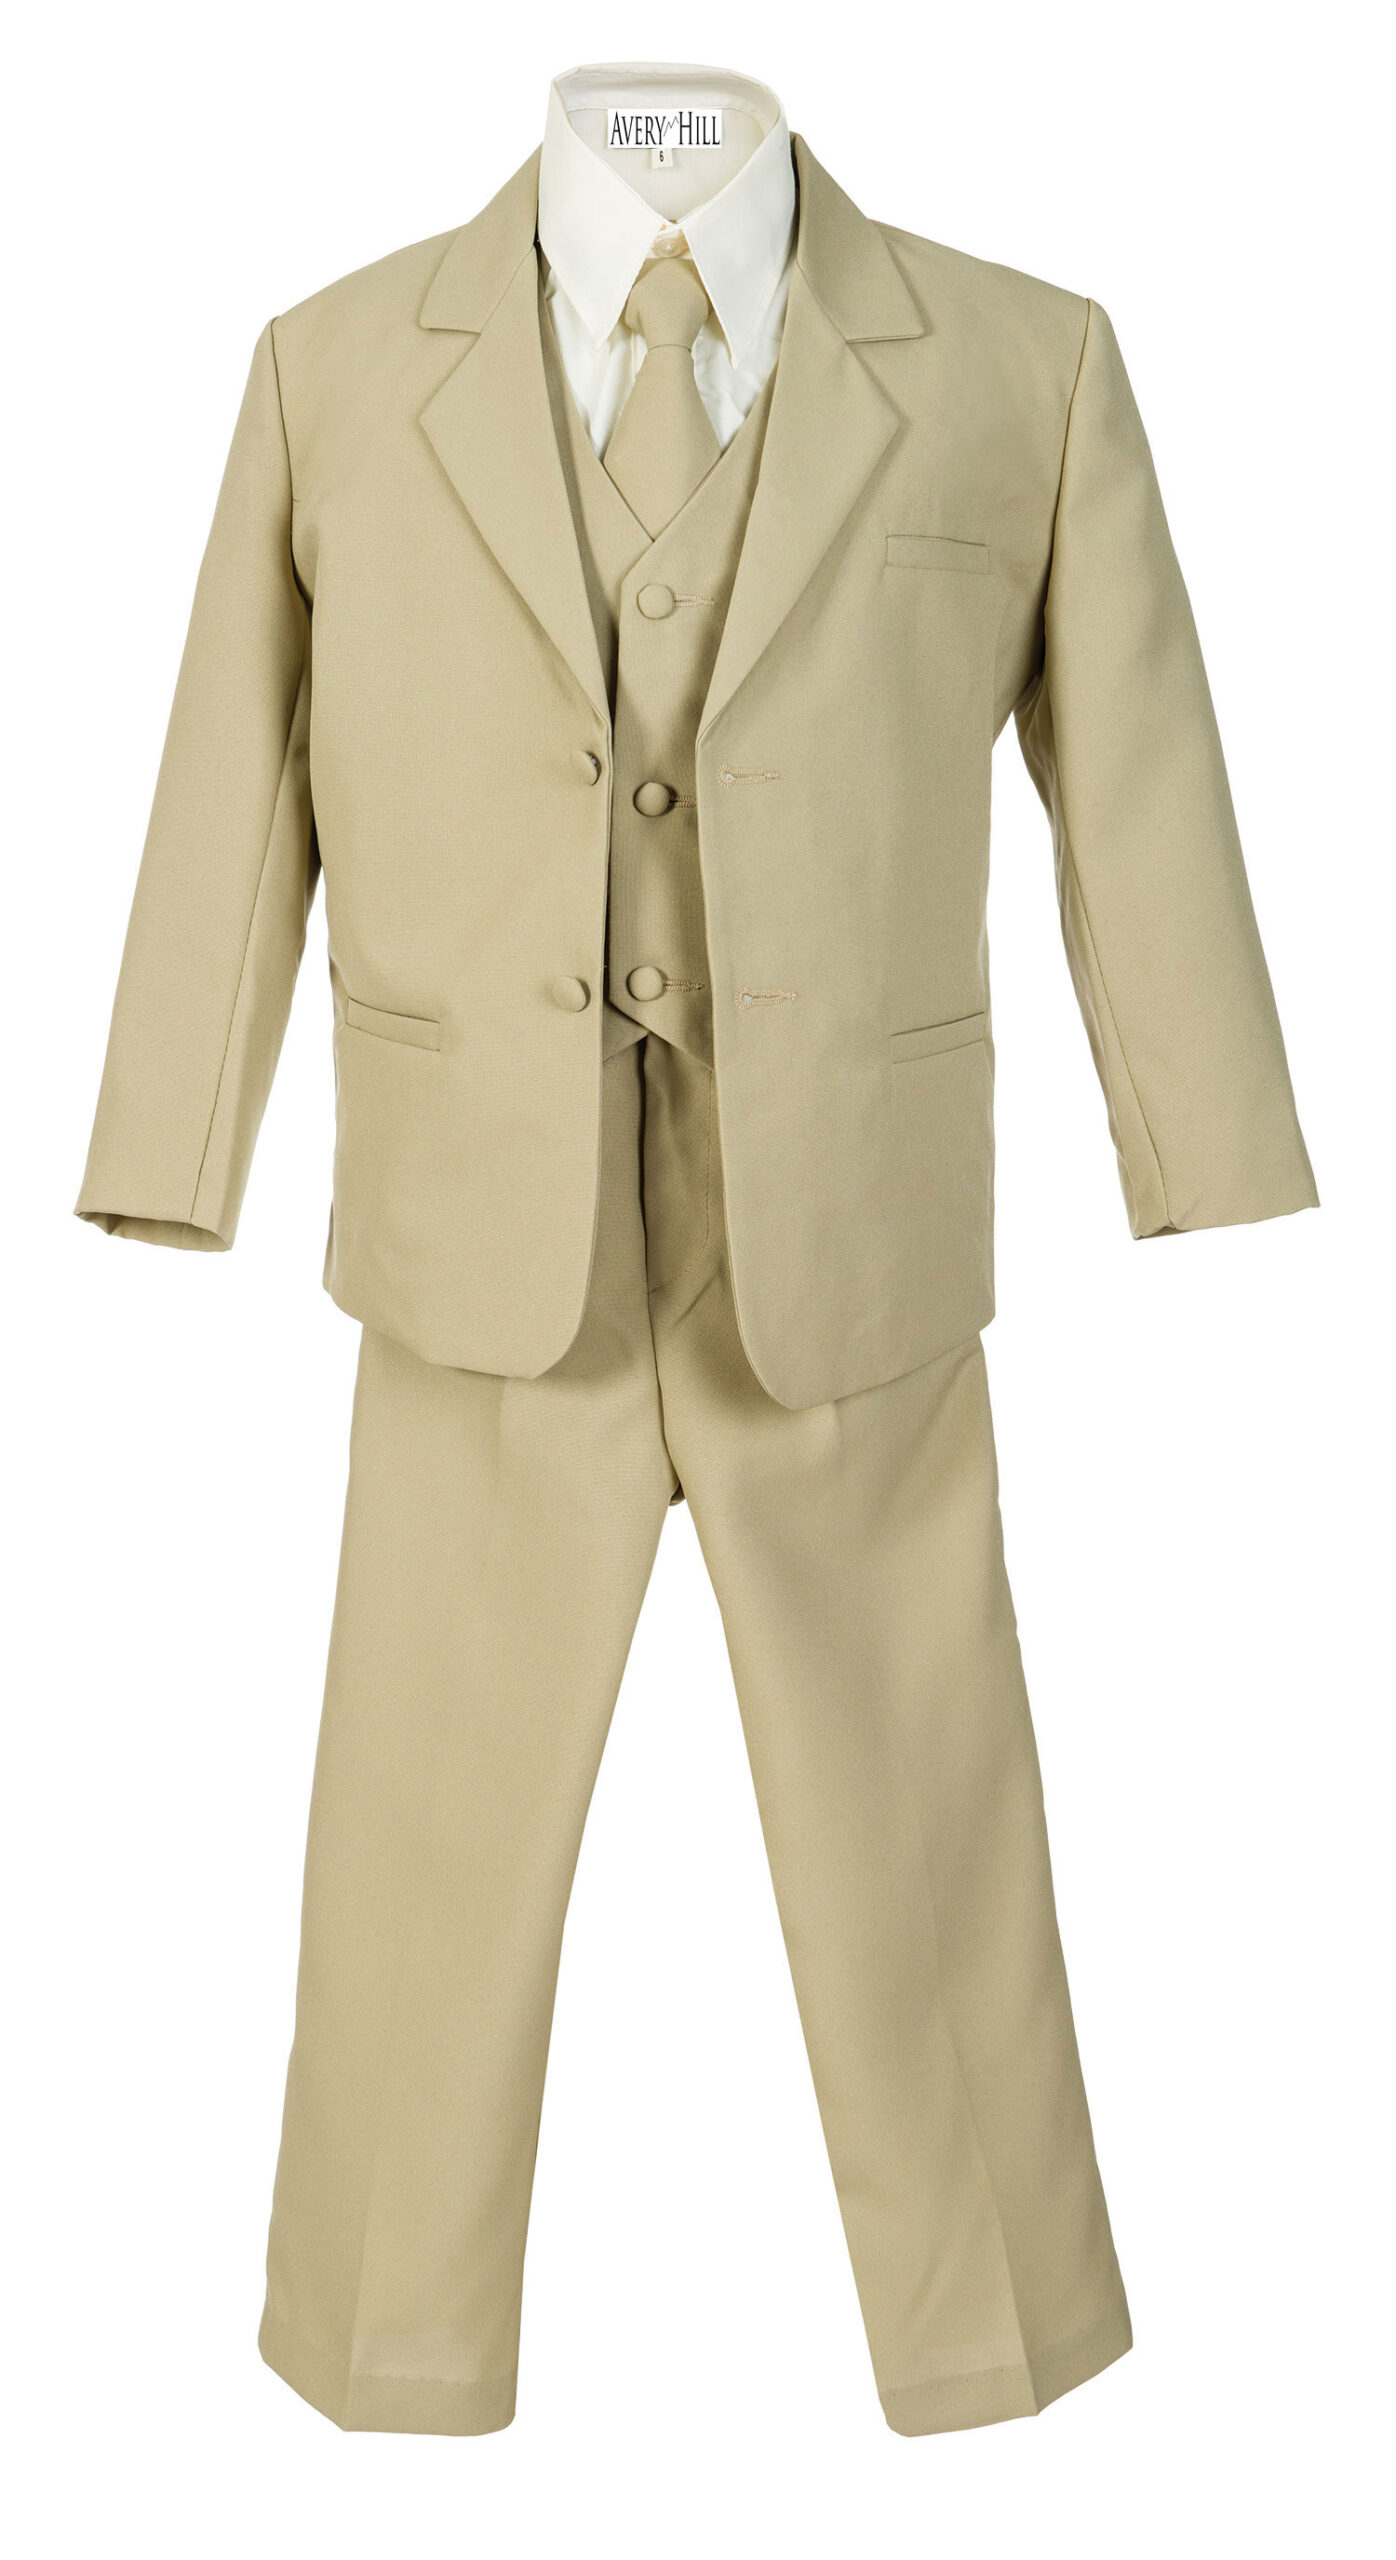 Avery Hill Boys Formal 5 Piece Suit with Shirt and Vest Khaki - 8